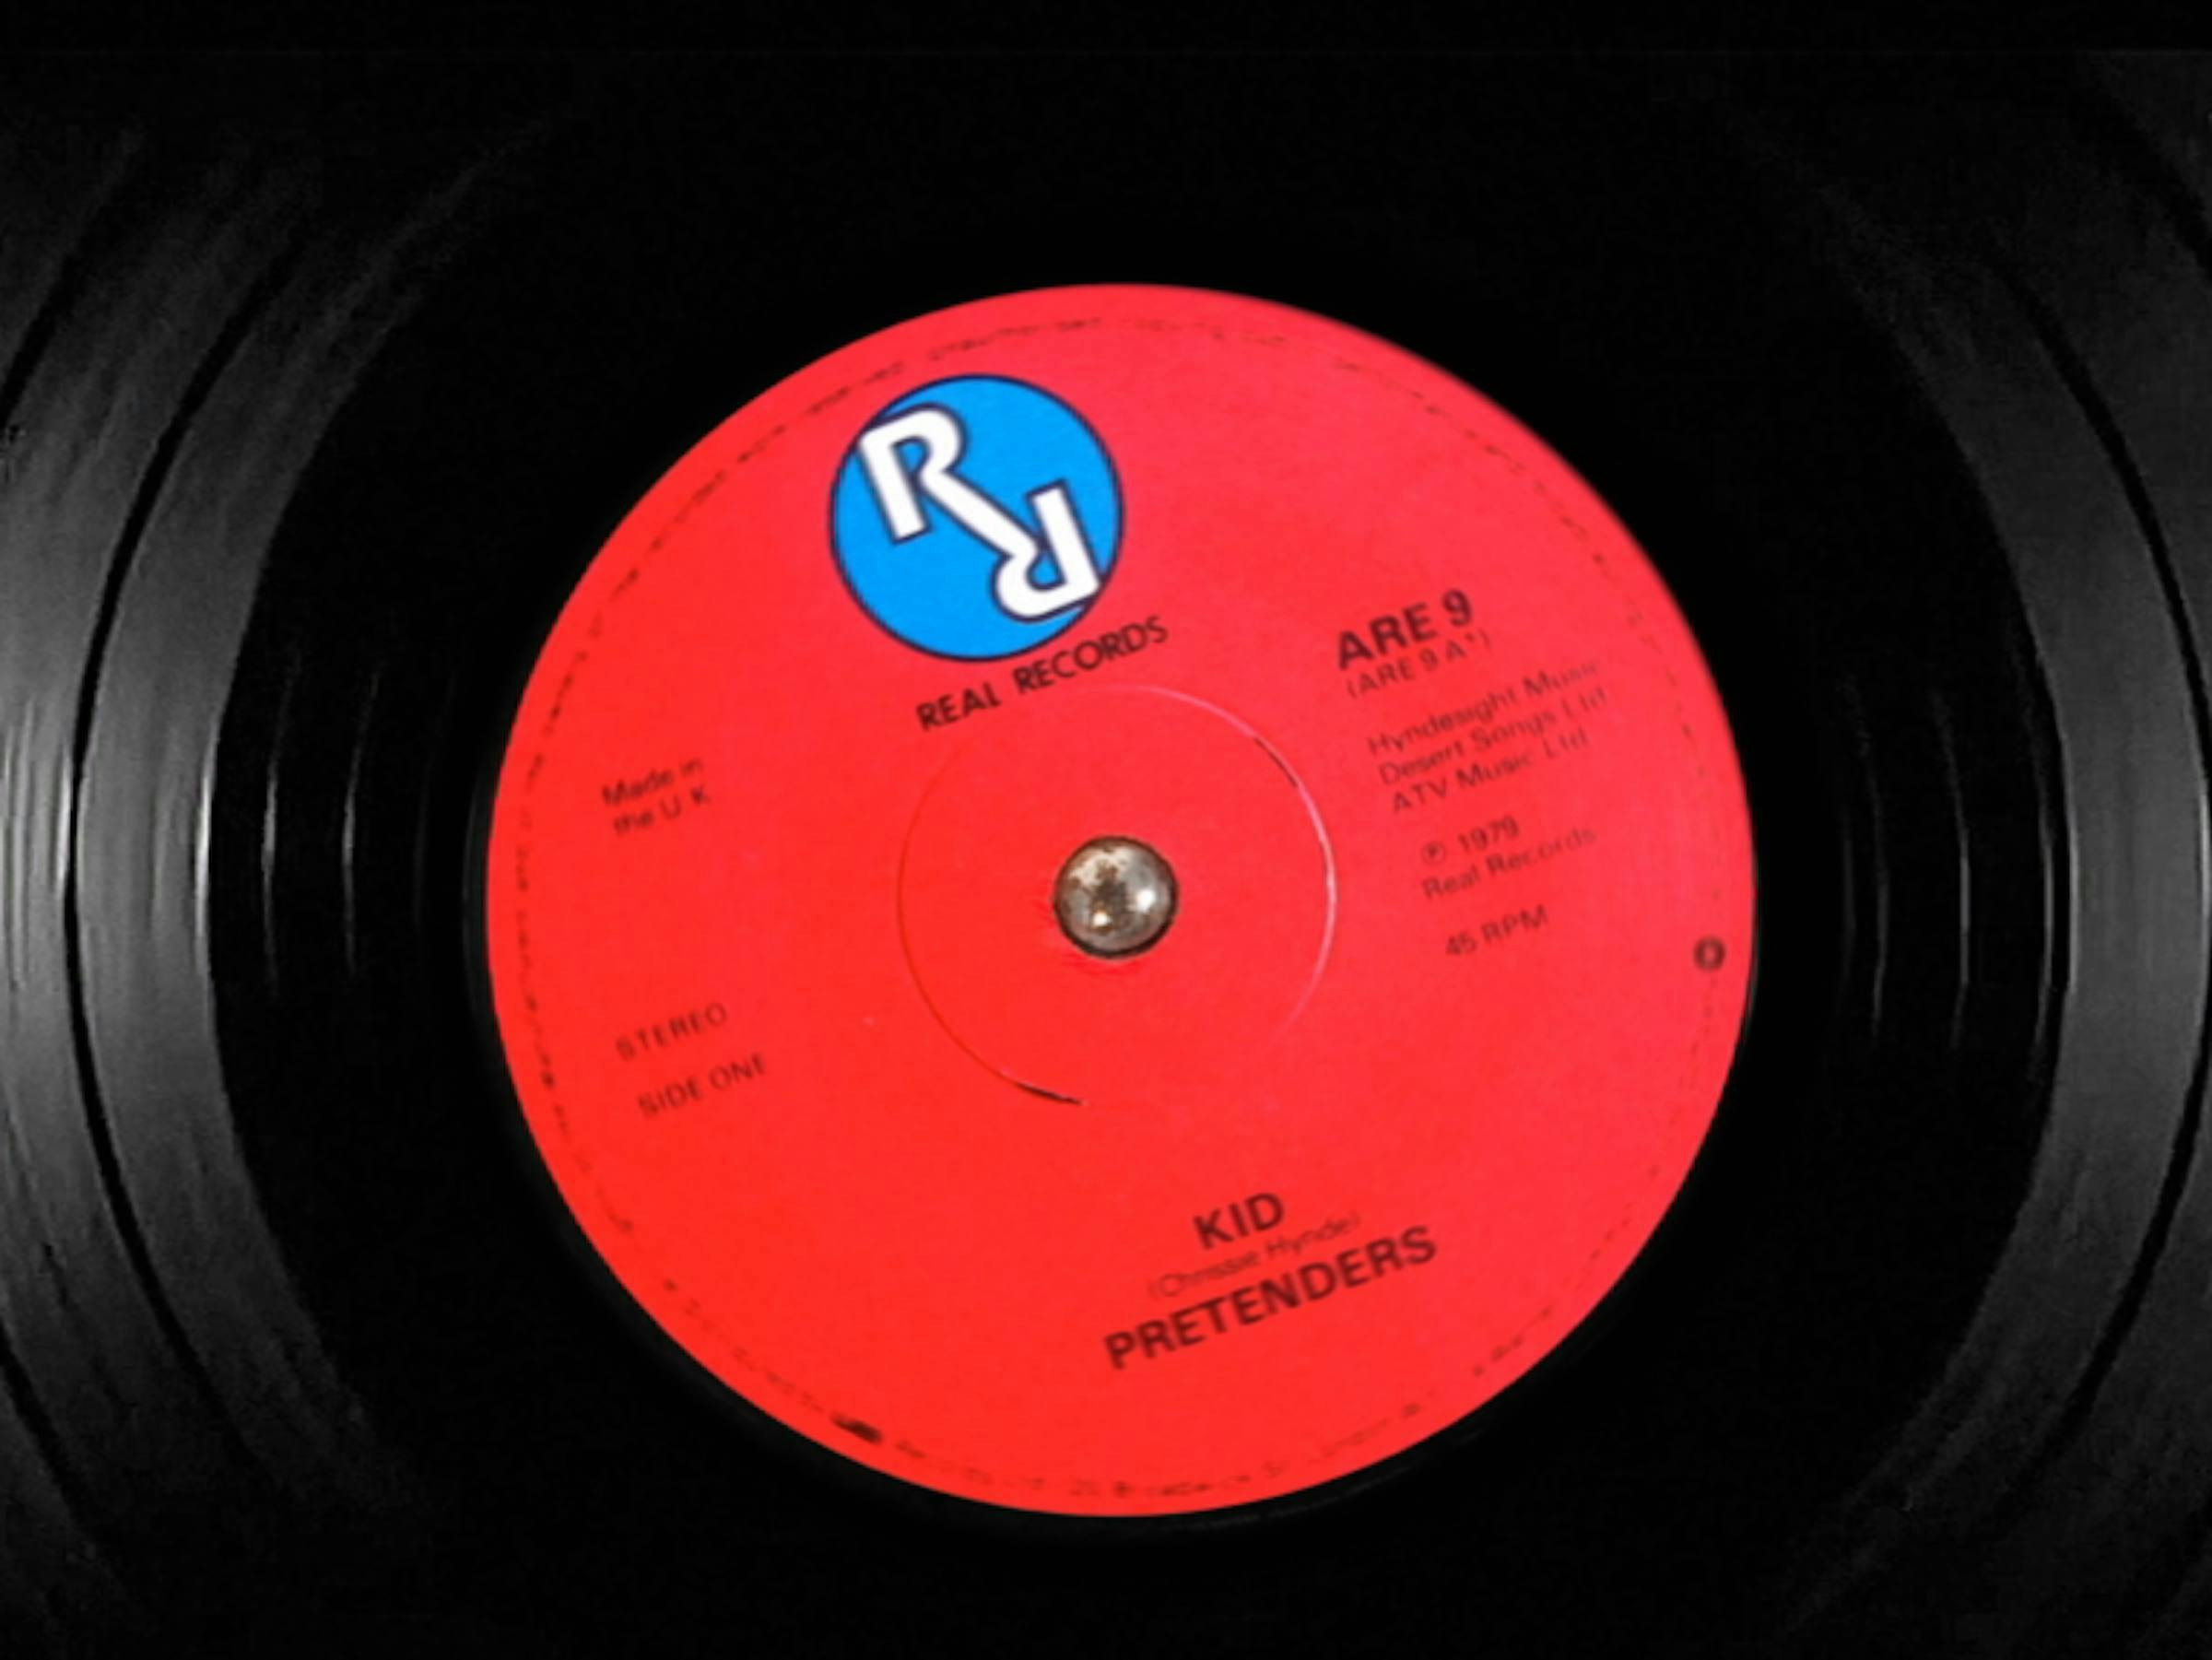 an image of the vinyl record prentenders by Kid. The label is red